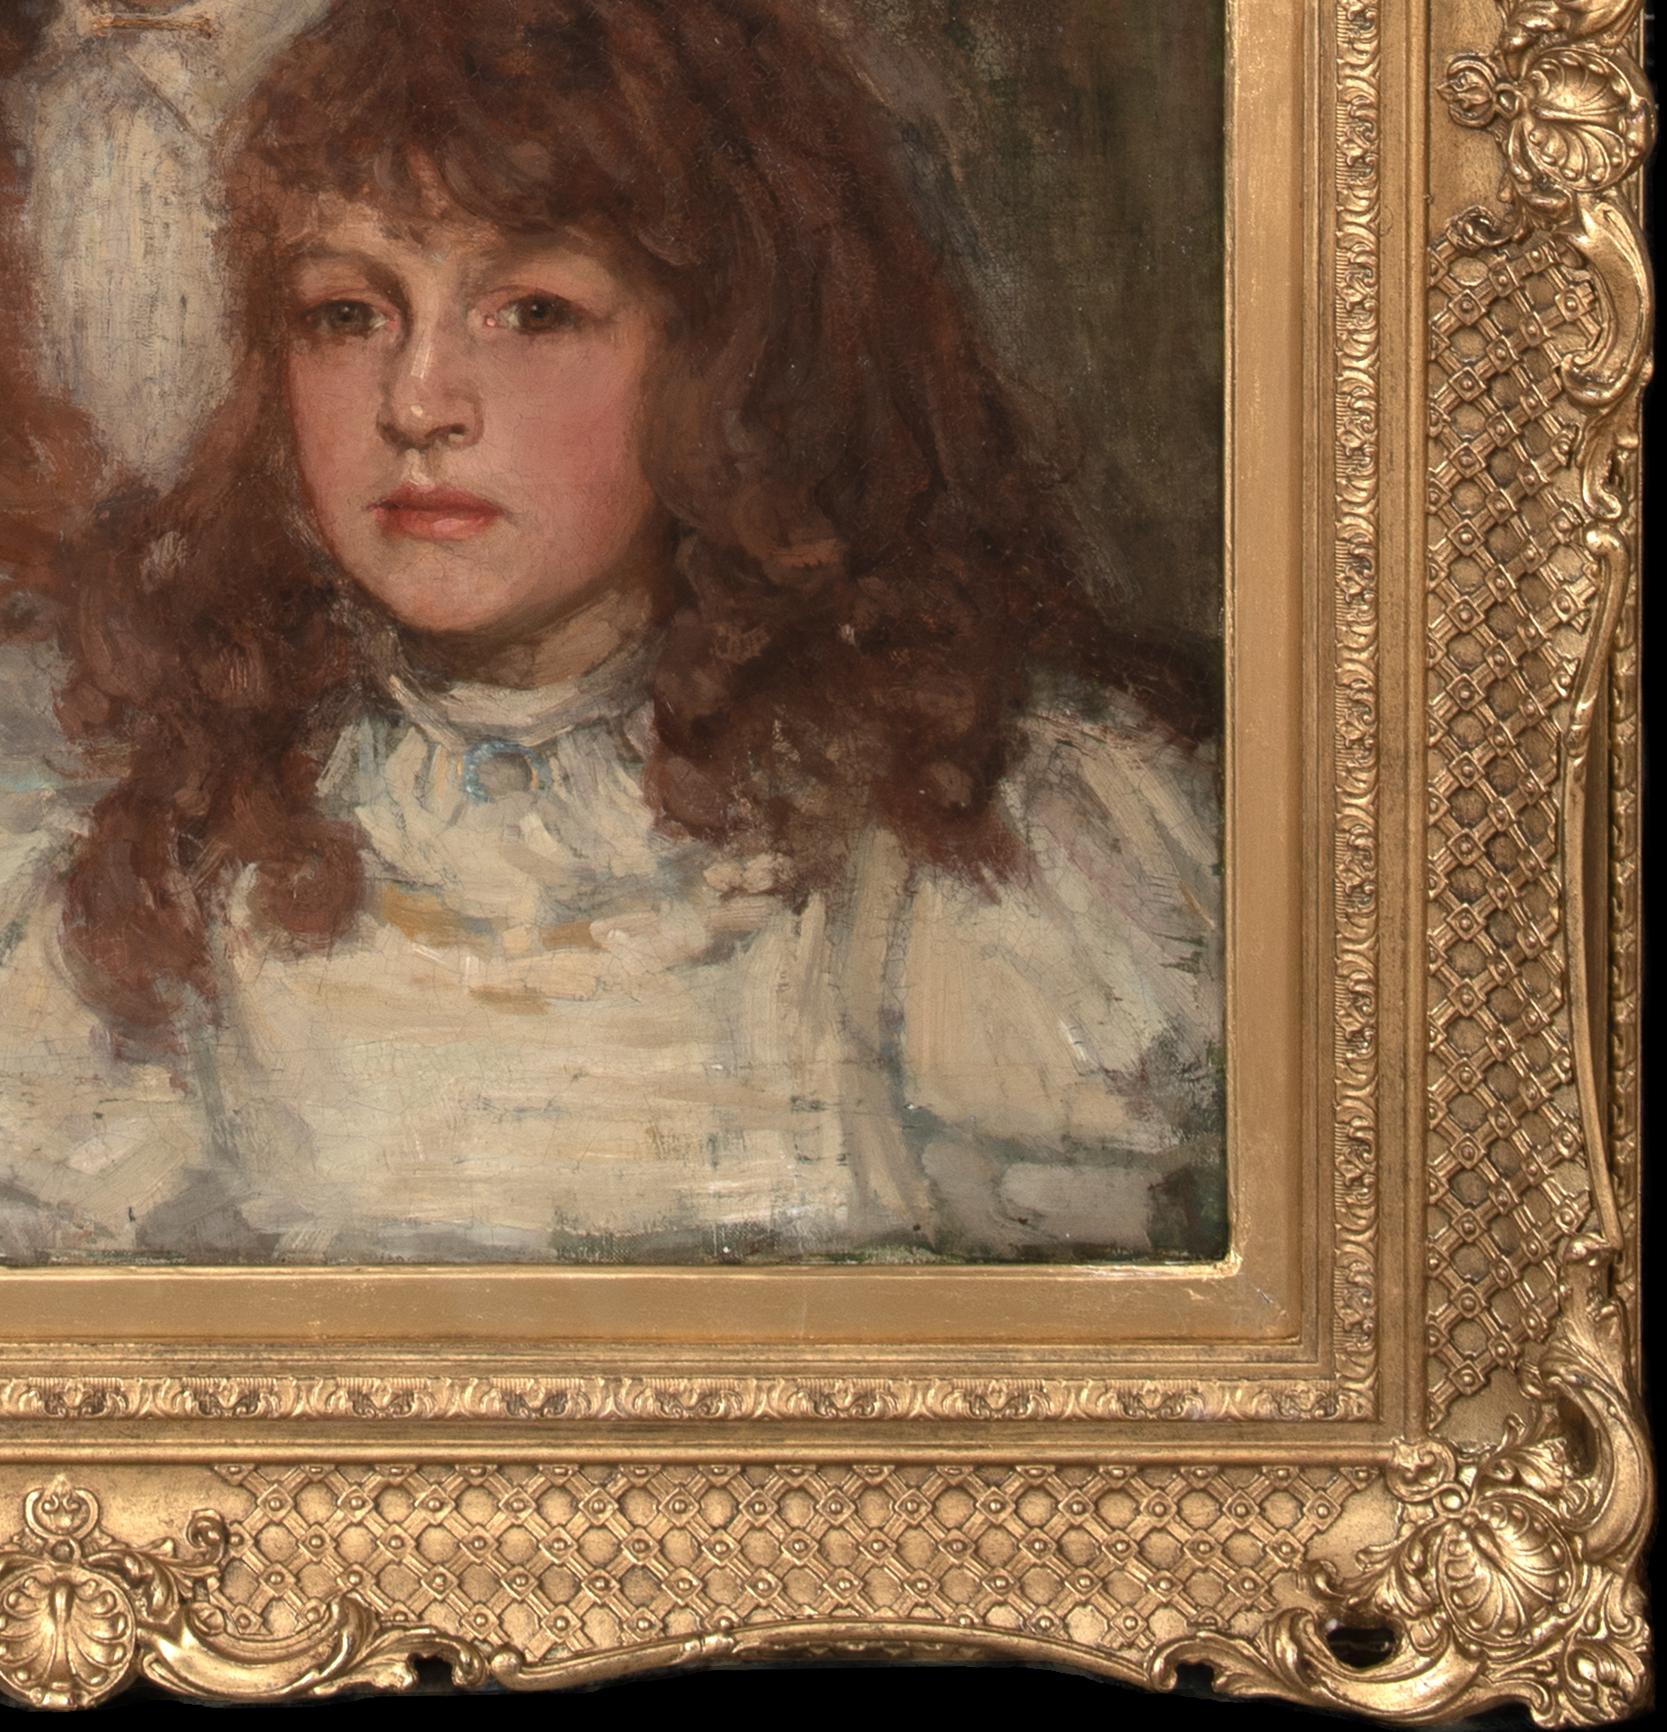 Portrait Of The Guinness Sisters, dated 1894

circle of James Abbott McNeill Whistler (1834-1903)

Signed with a rose symbol

Large 19th Century Irish portrait of The Guinness Sisters, oil on canvas signed with a rose symbol. Beautiful portrait of